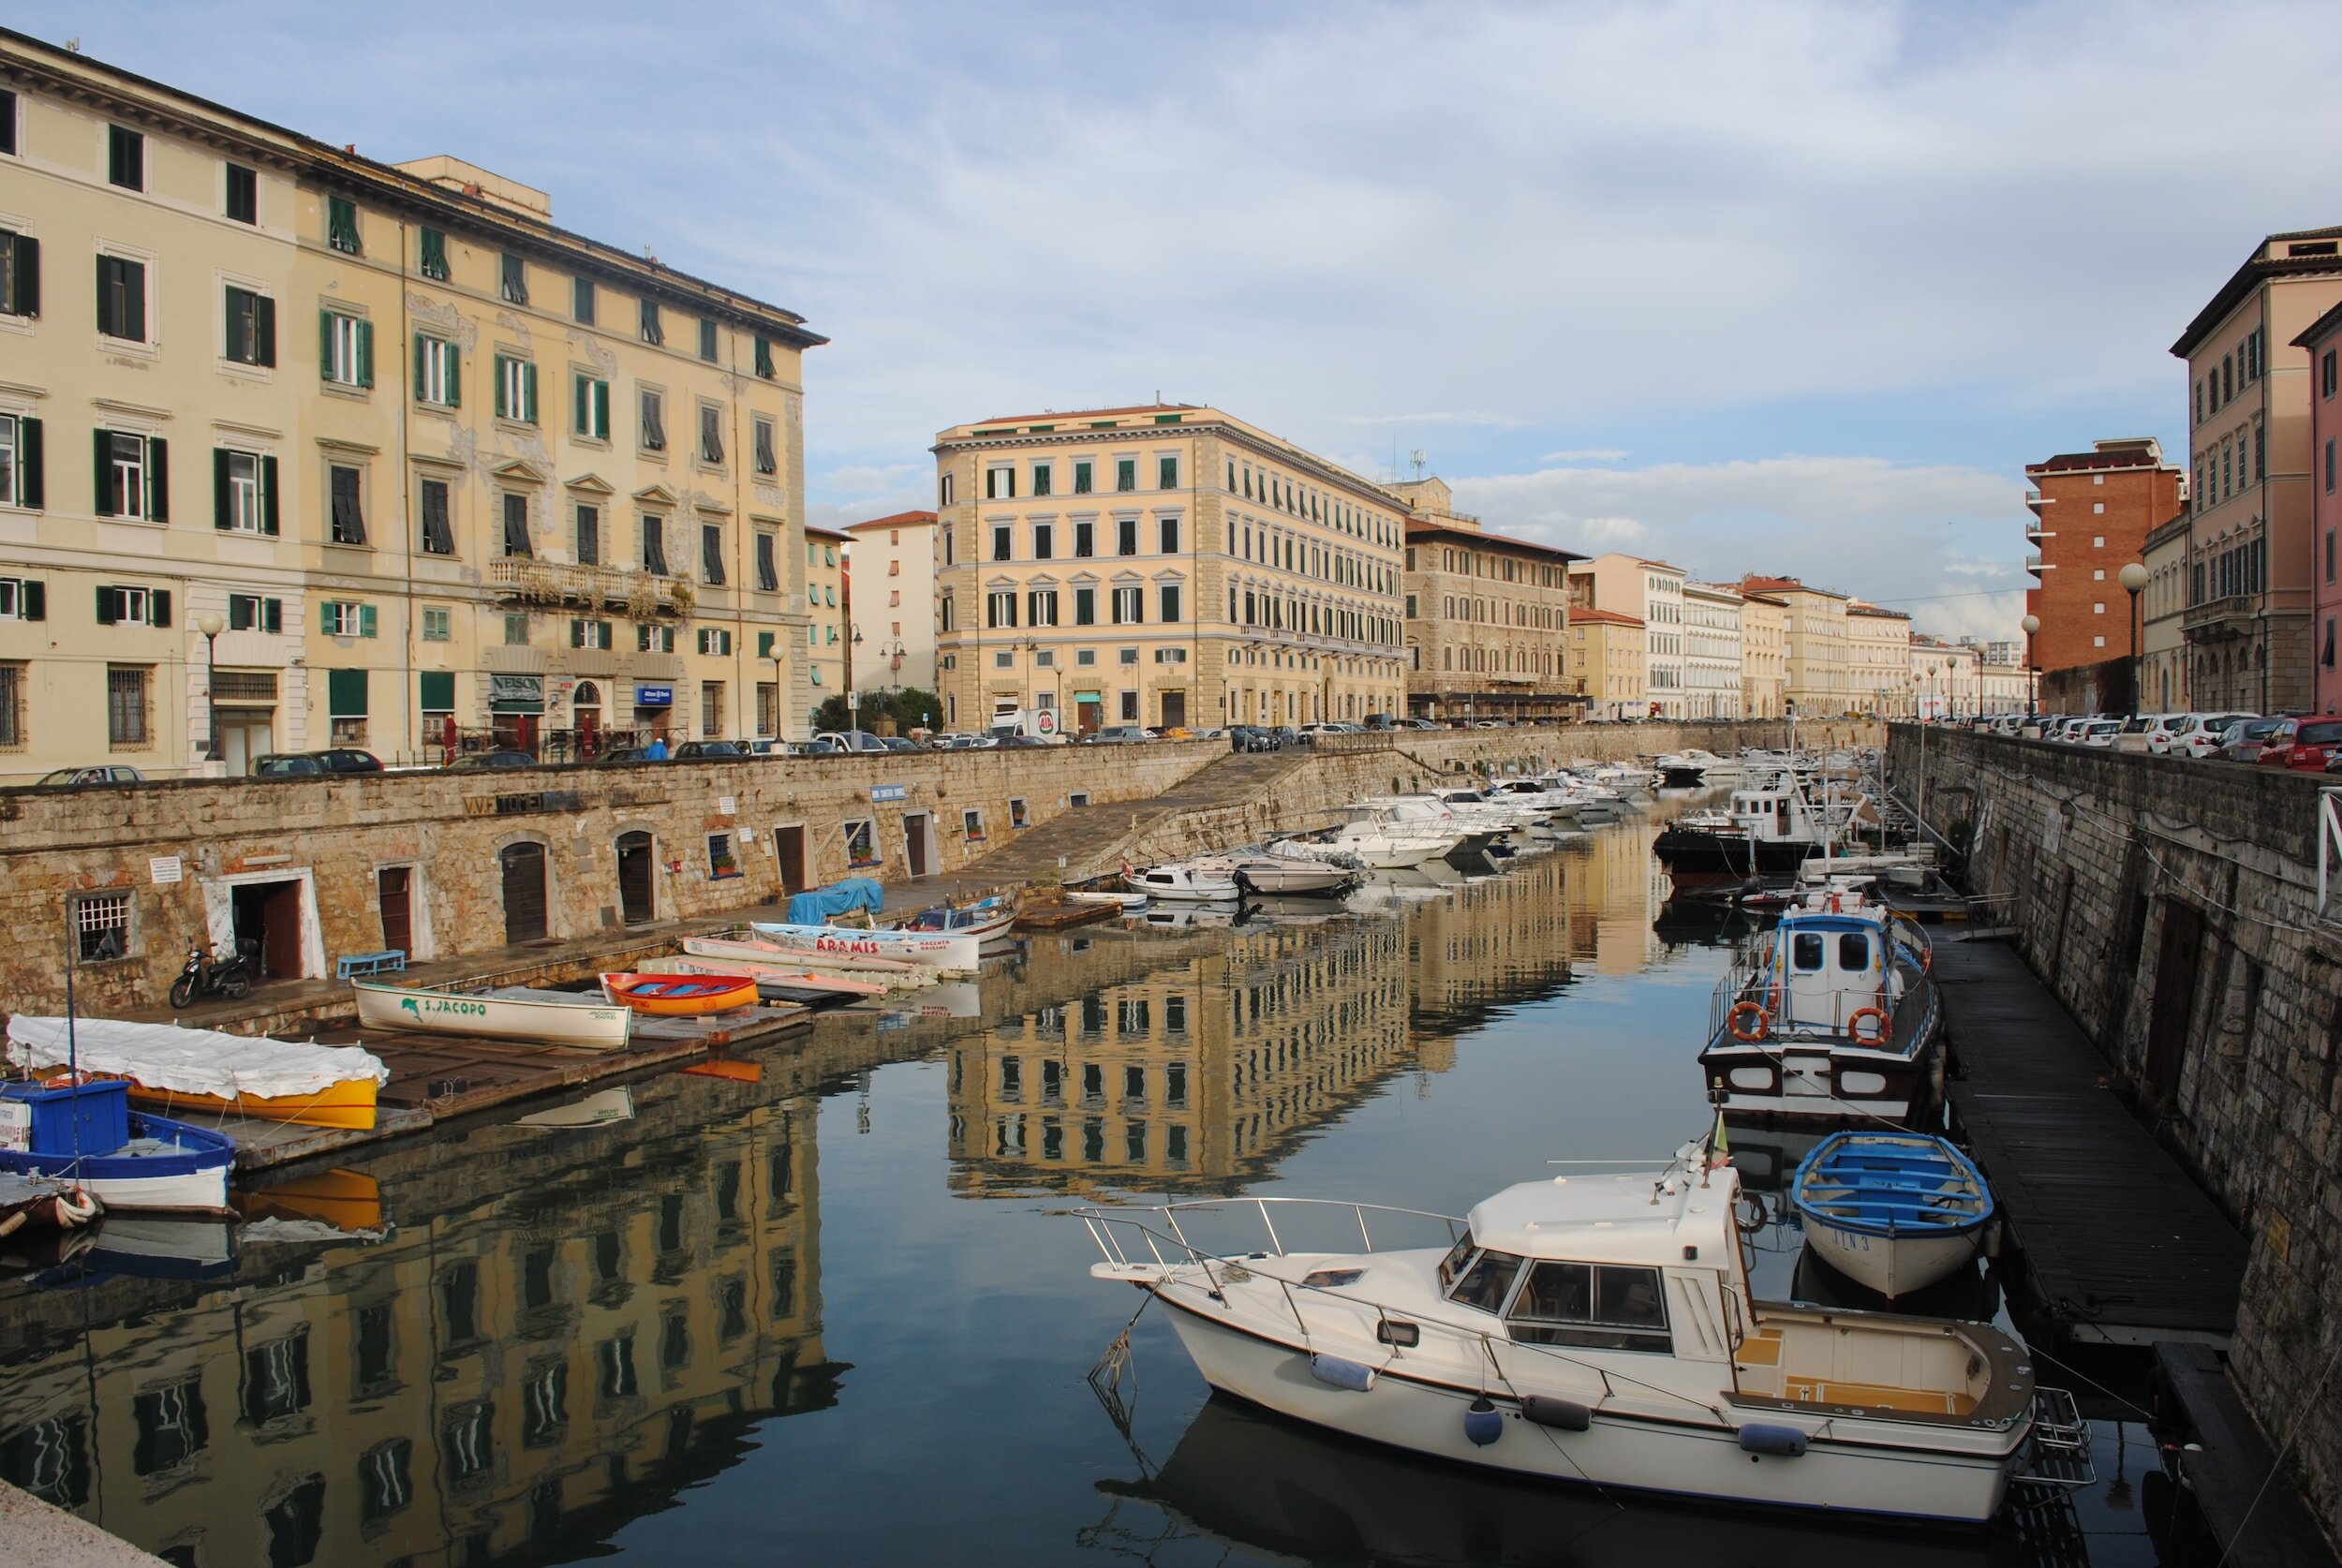 A canal in Livorno, with boats docked in the water and buildings stretching along either side of the waterfront